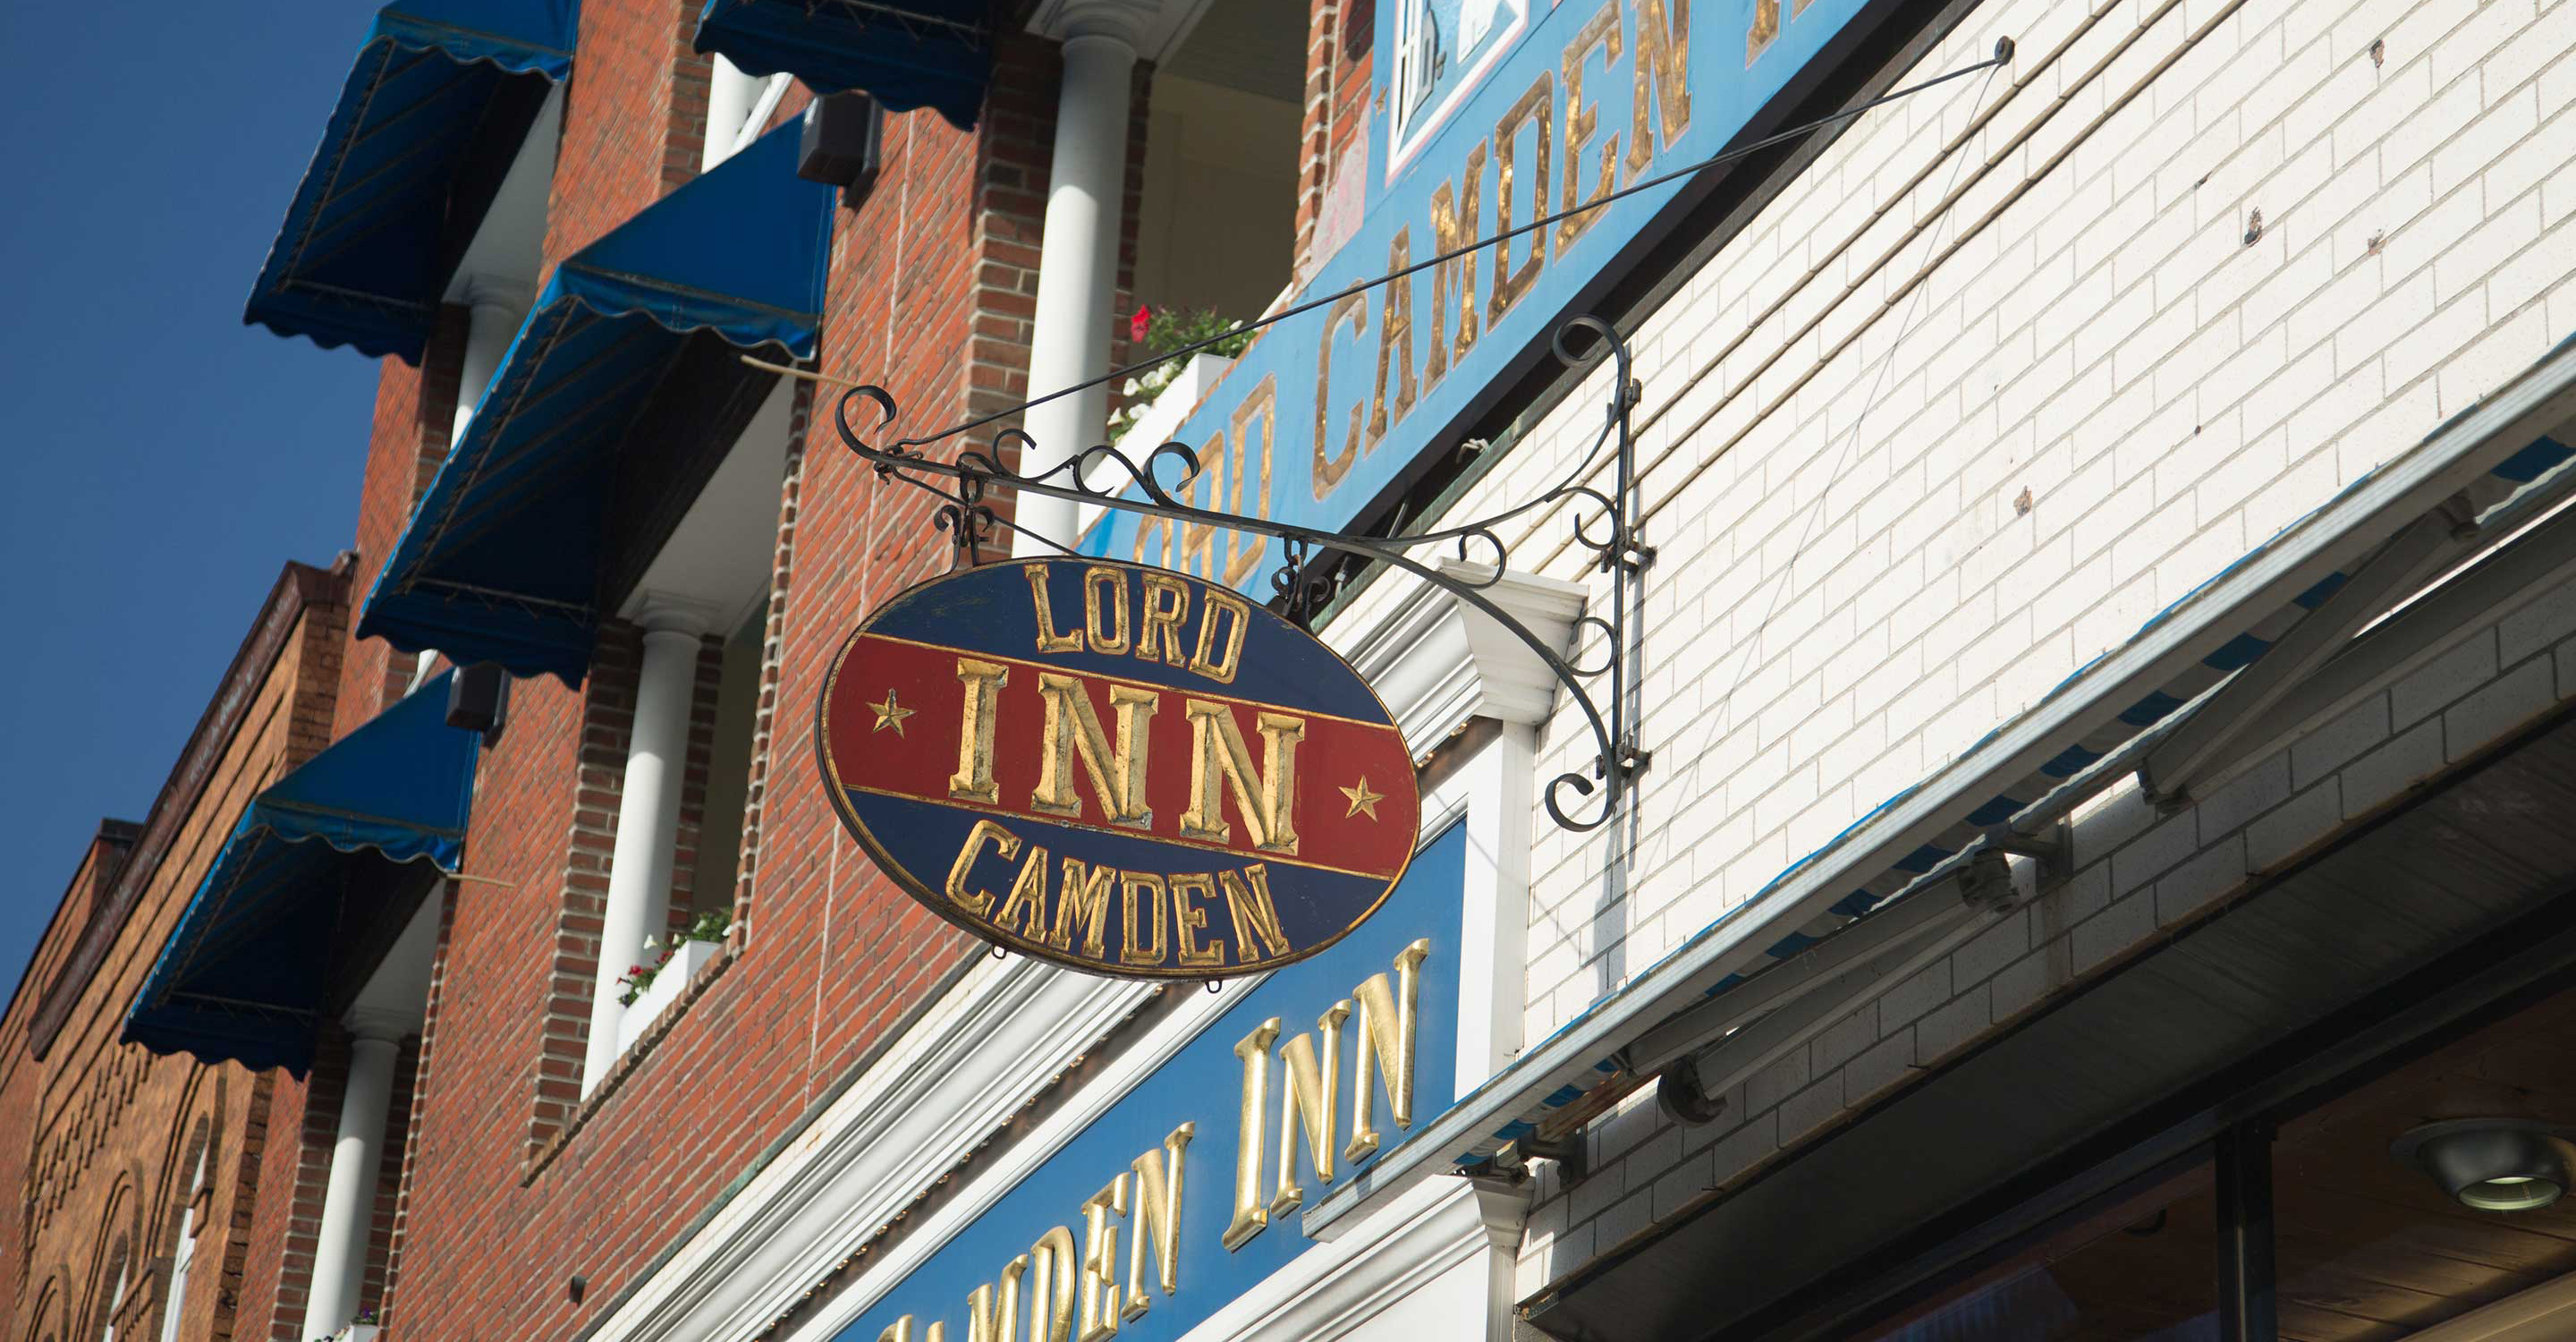 A sign hangs outside The Lord Camden Inn hotel in Camden, Maine, USA